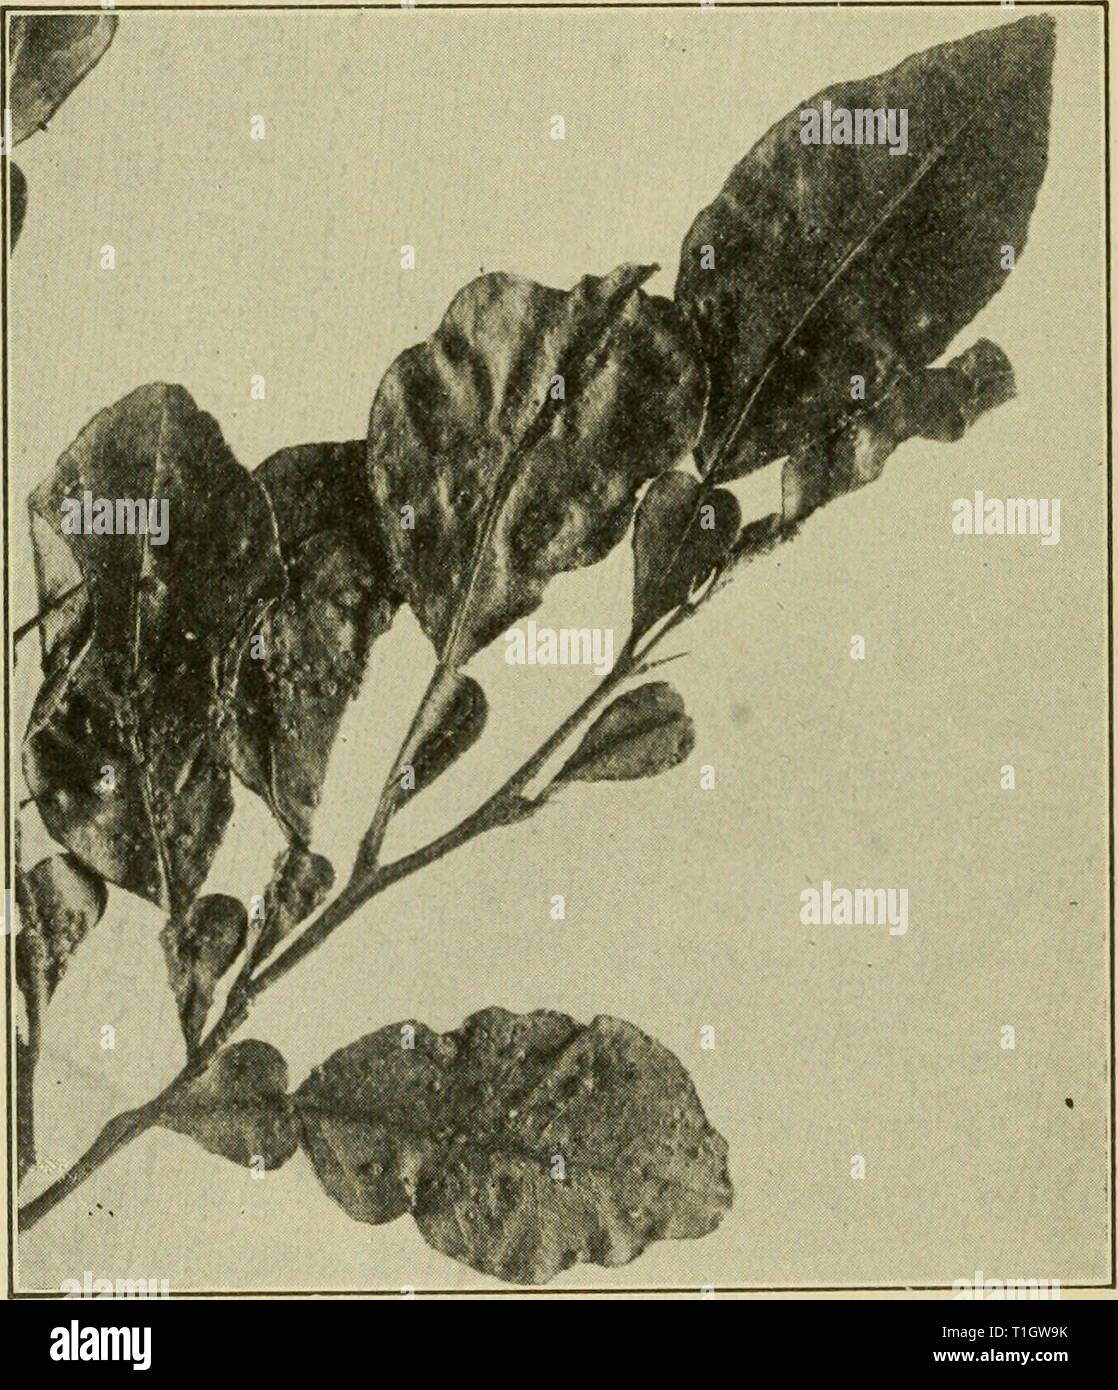 Diseases of economic plants (1921) Diseases of economic plants  diseasesofeconom01stev Year: 1921  142 Diseases of Economic Plants ored. A considerable portion of the ''June-drop' is caused by this disease. The spores of the fungus gain entrance through shght imperfections of the skin at the navel end, producing de- cayed areas under the skin. All diseased fruit should be collected and burned or buried deeply. Scab (Cladosporium citri Mass.). — Scab has been known    Fig. 74. — Scab of the sour orange. After Hume. for twenty years, and occurs on the sour citrus fruits, such as the pomelo, kumq Stock Photo